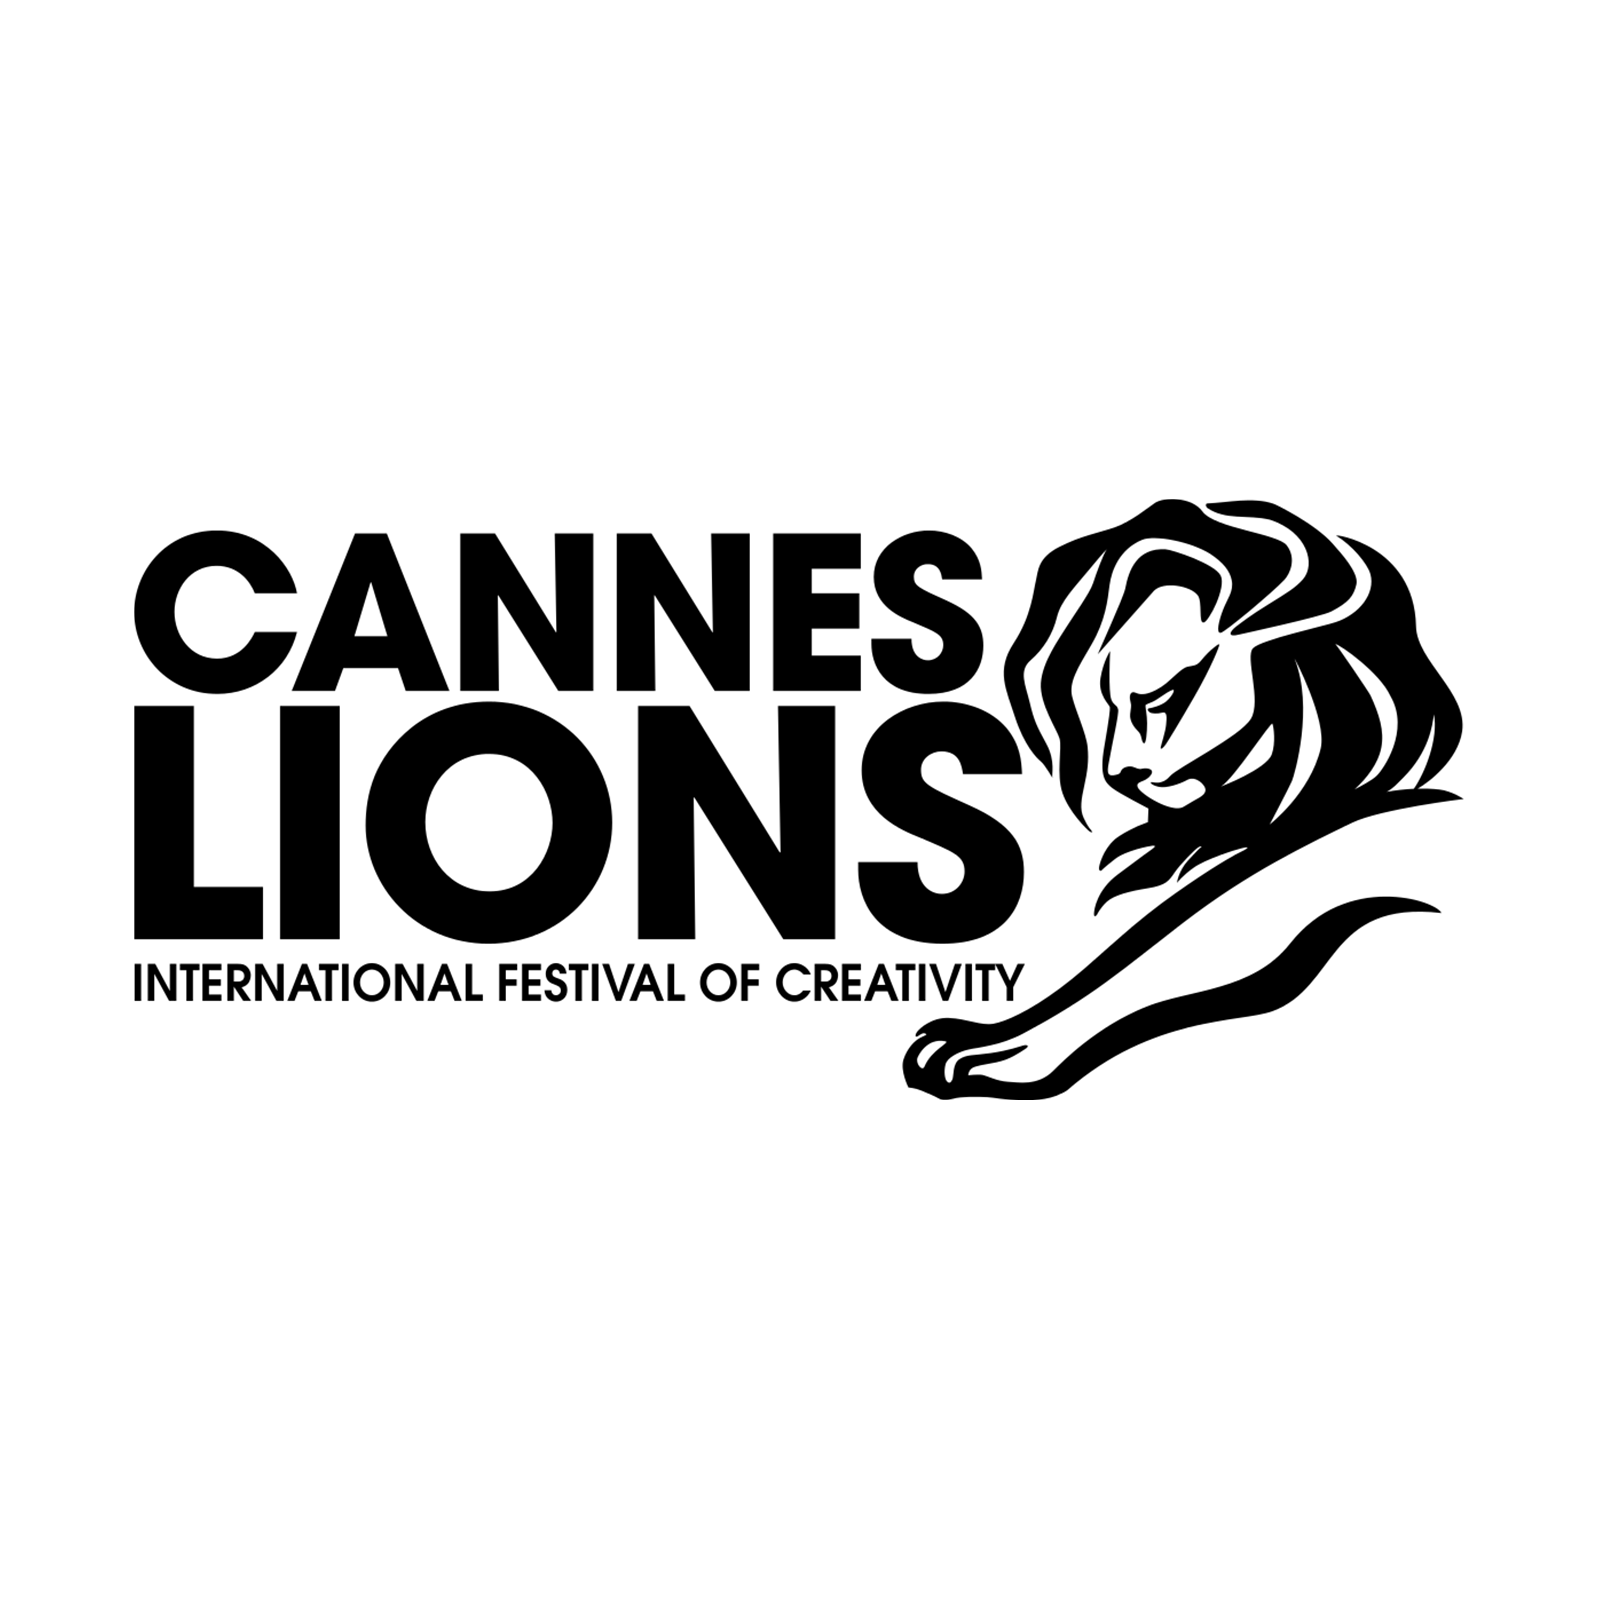 LIONS FESTIVAL PRINTING IN CANNES